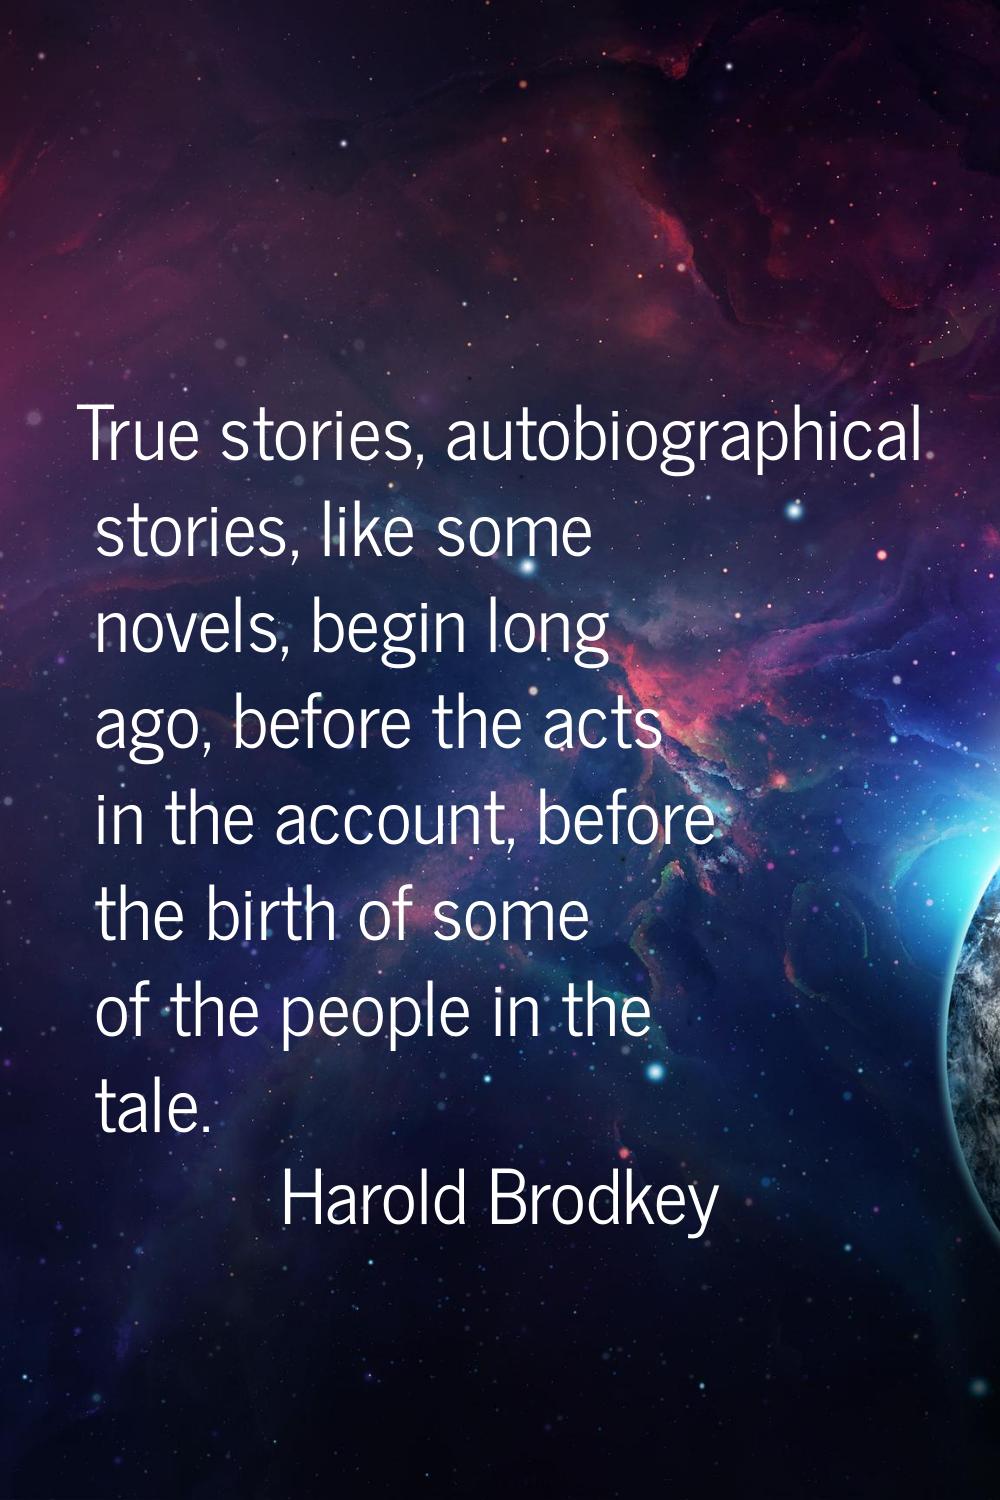 True stories, autobiographical stories, like some novels, begin long ago, before the acts in the ac